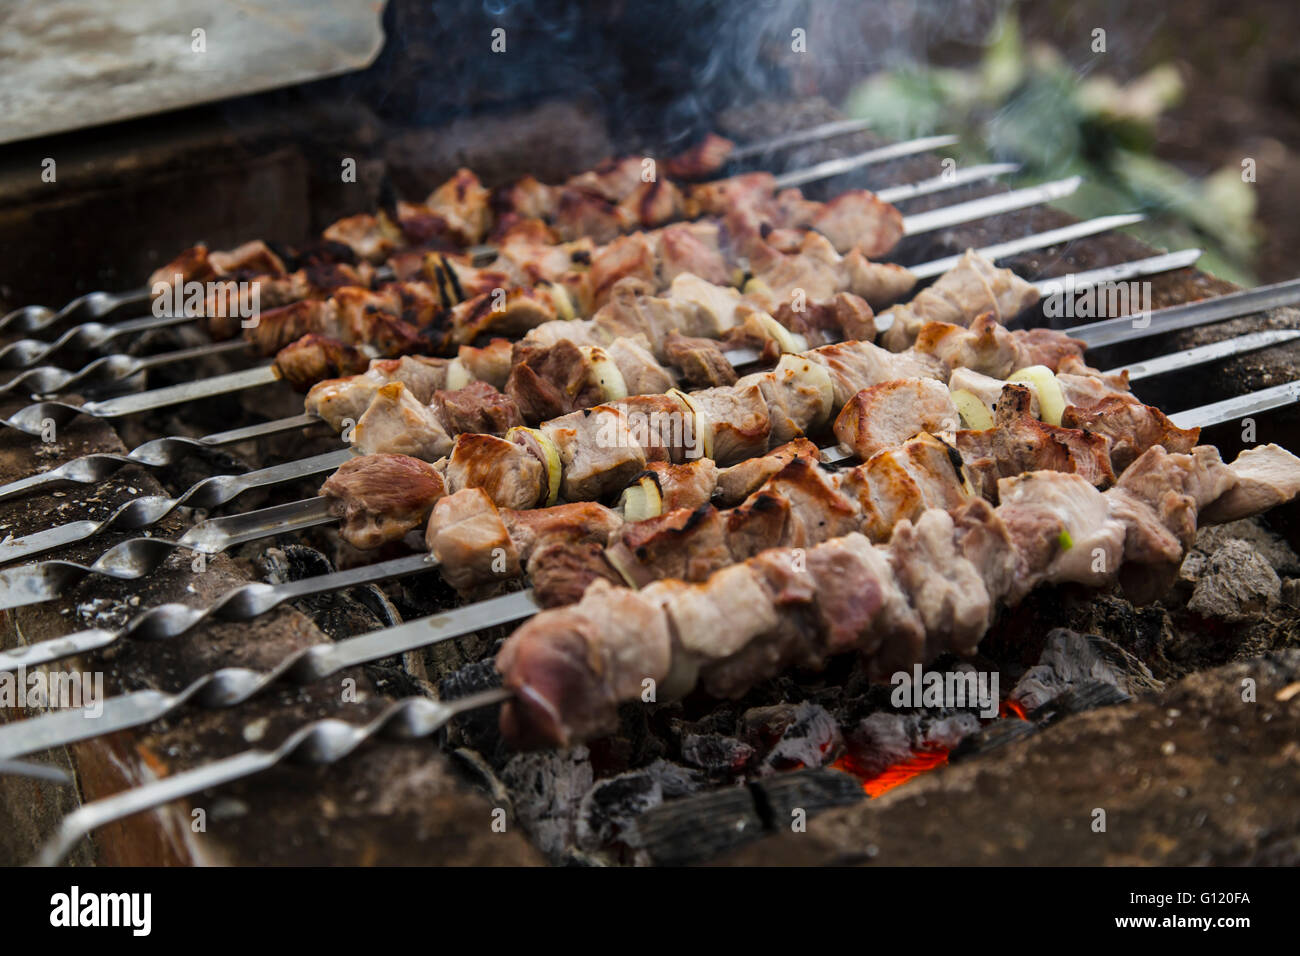 The shish kebabs prepared on a brazier Stock Photo